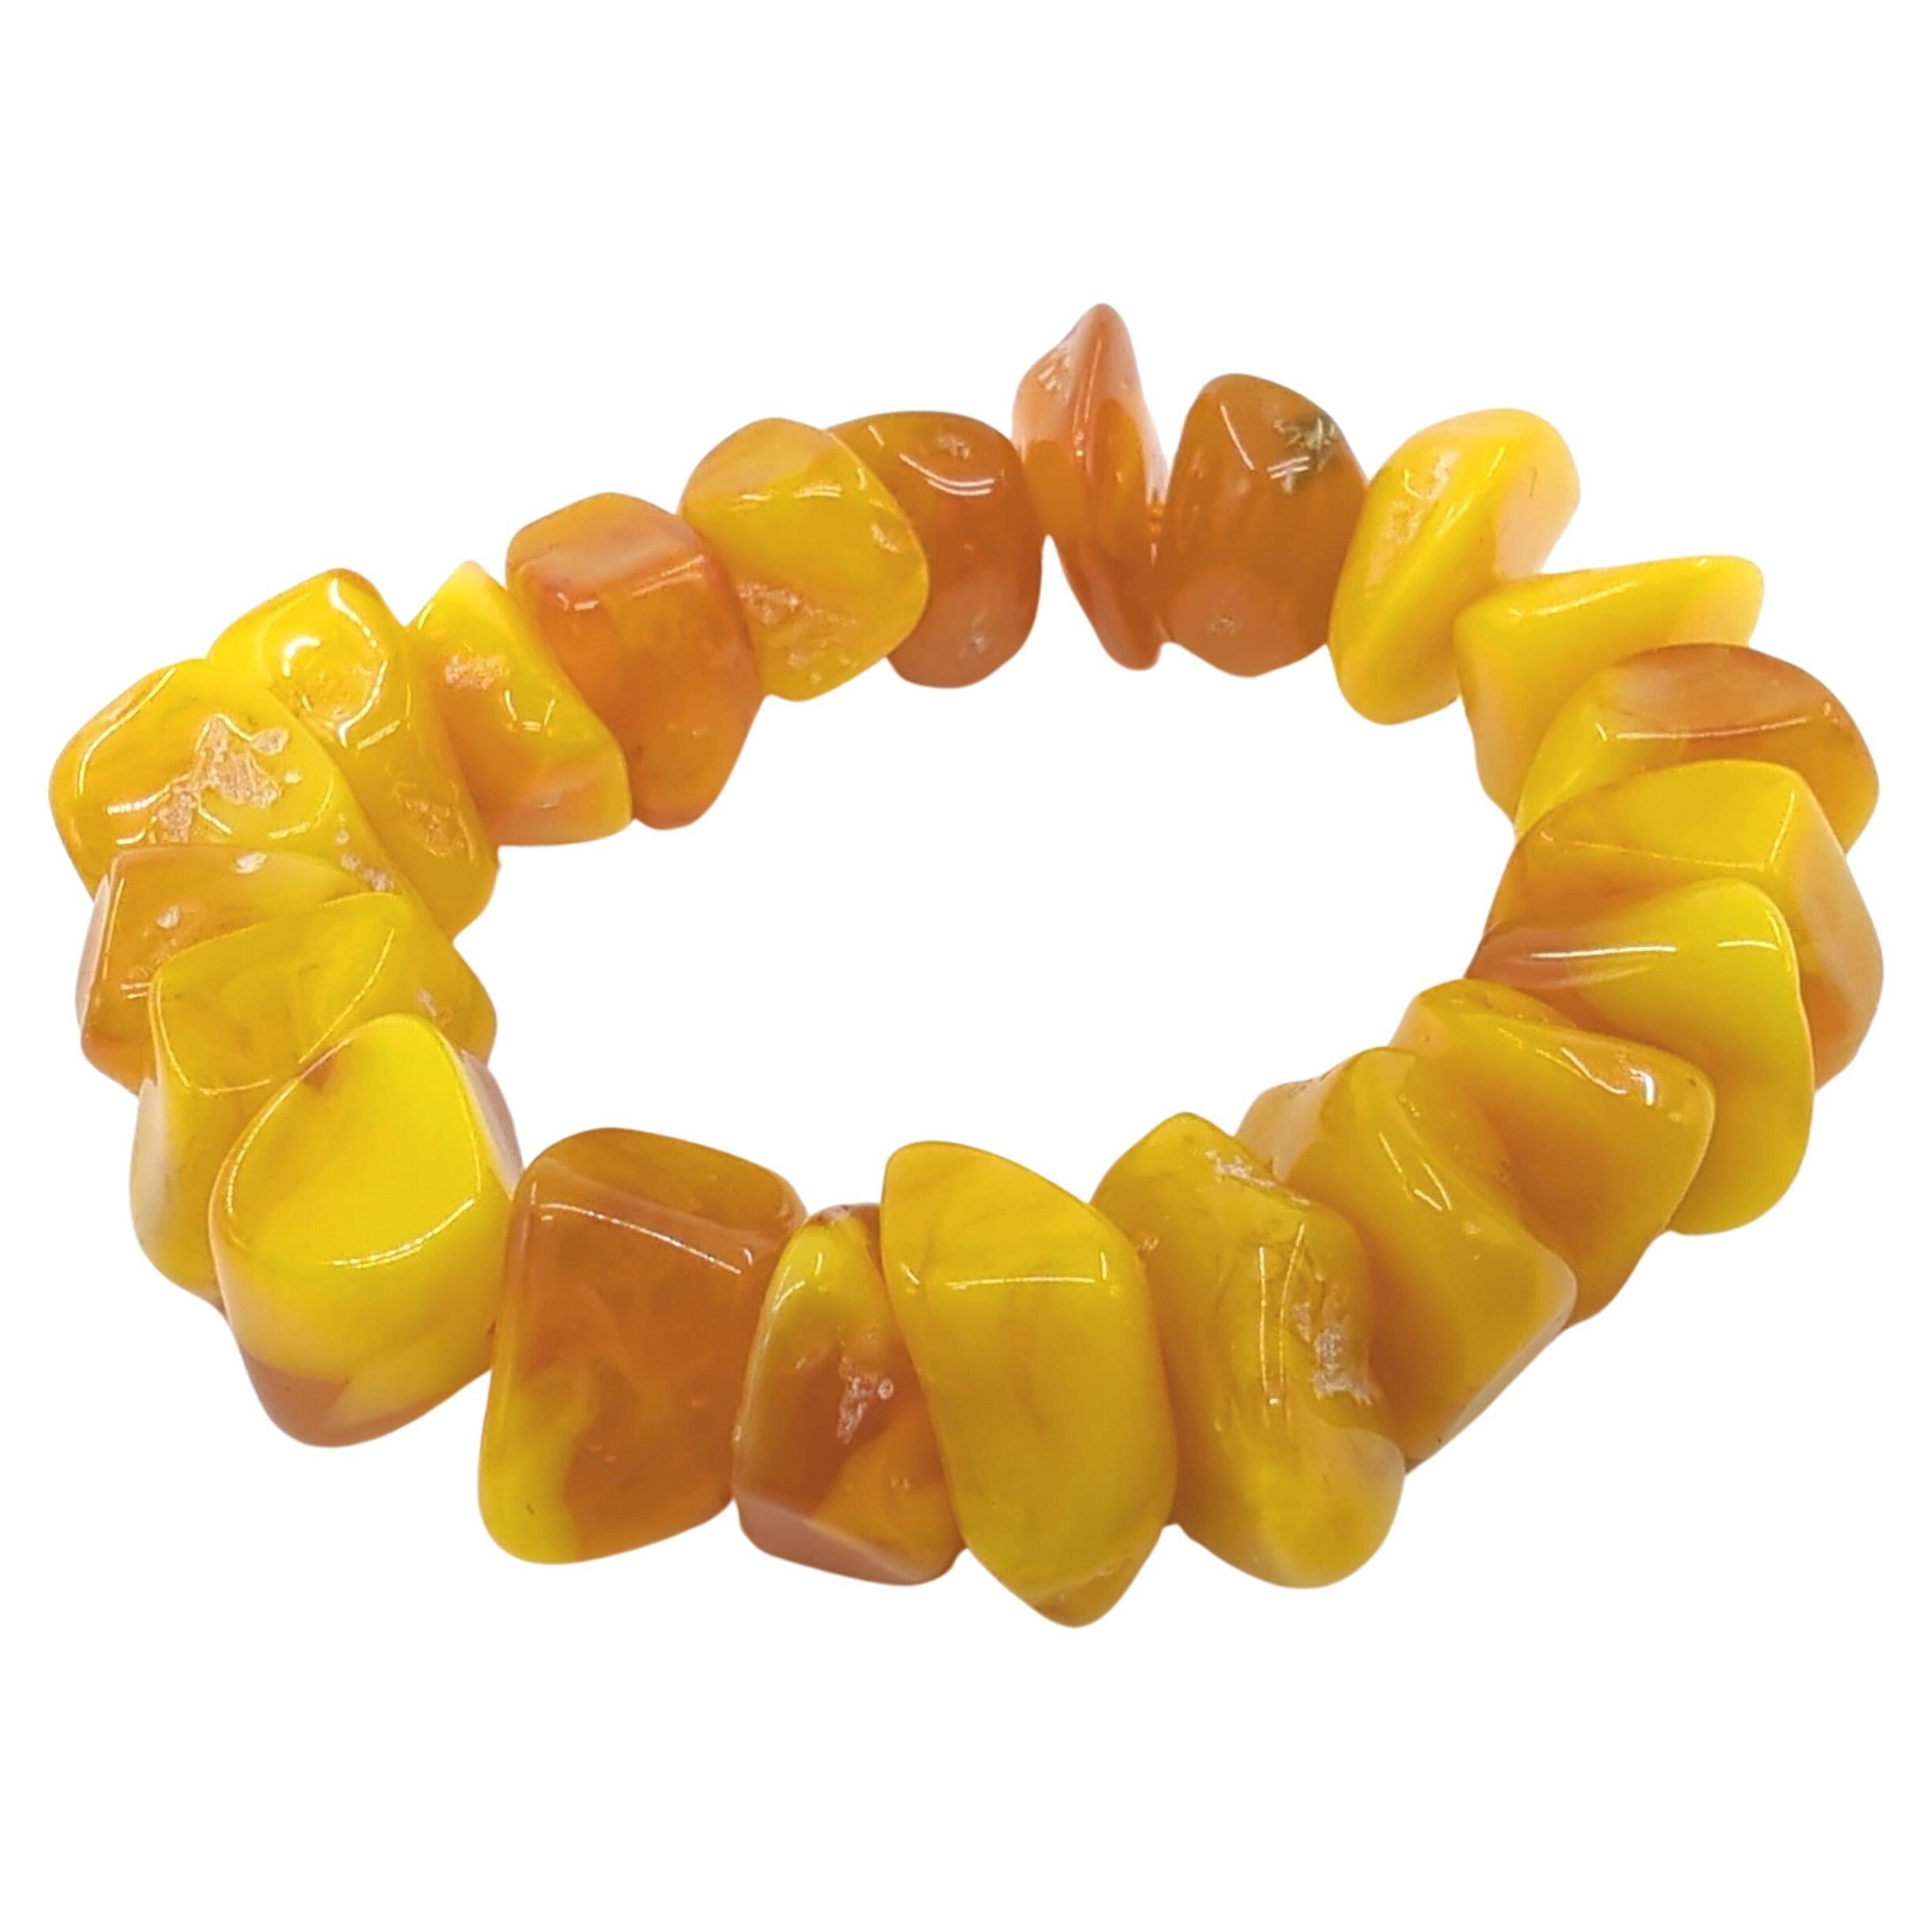 Chinese Vintage Natural Form Polished Beeswax Bracelet Intense Yellow Color